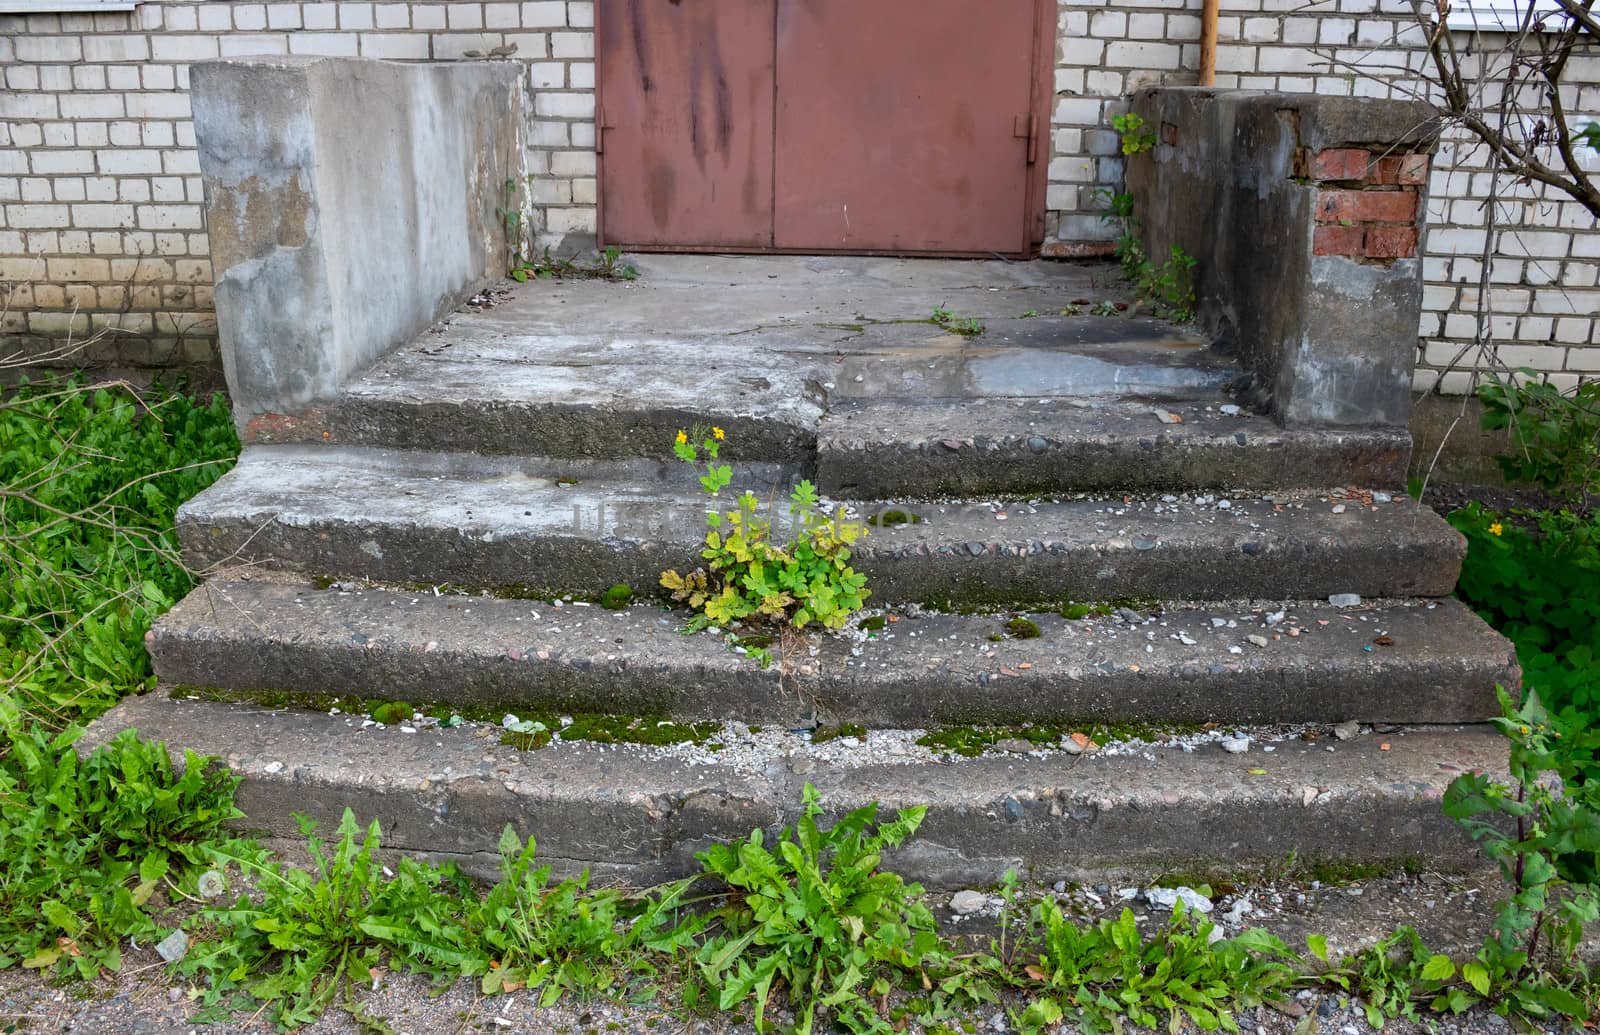 Old overgrown porch of an abandoned building.